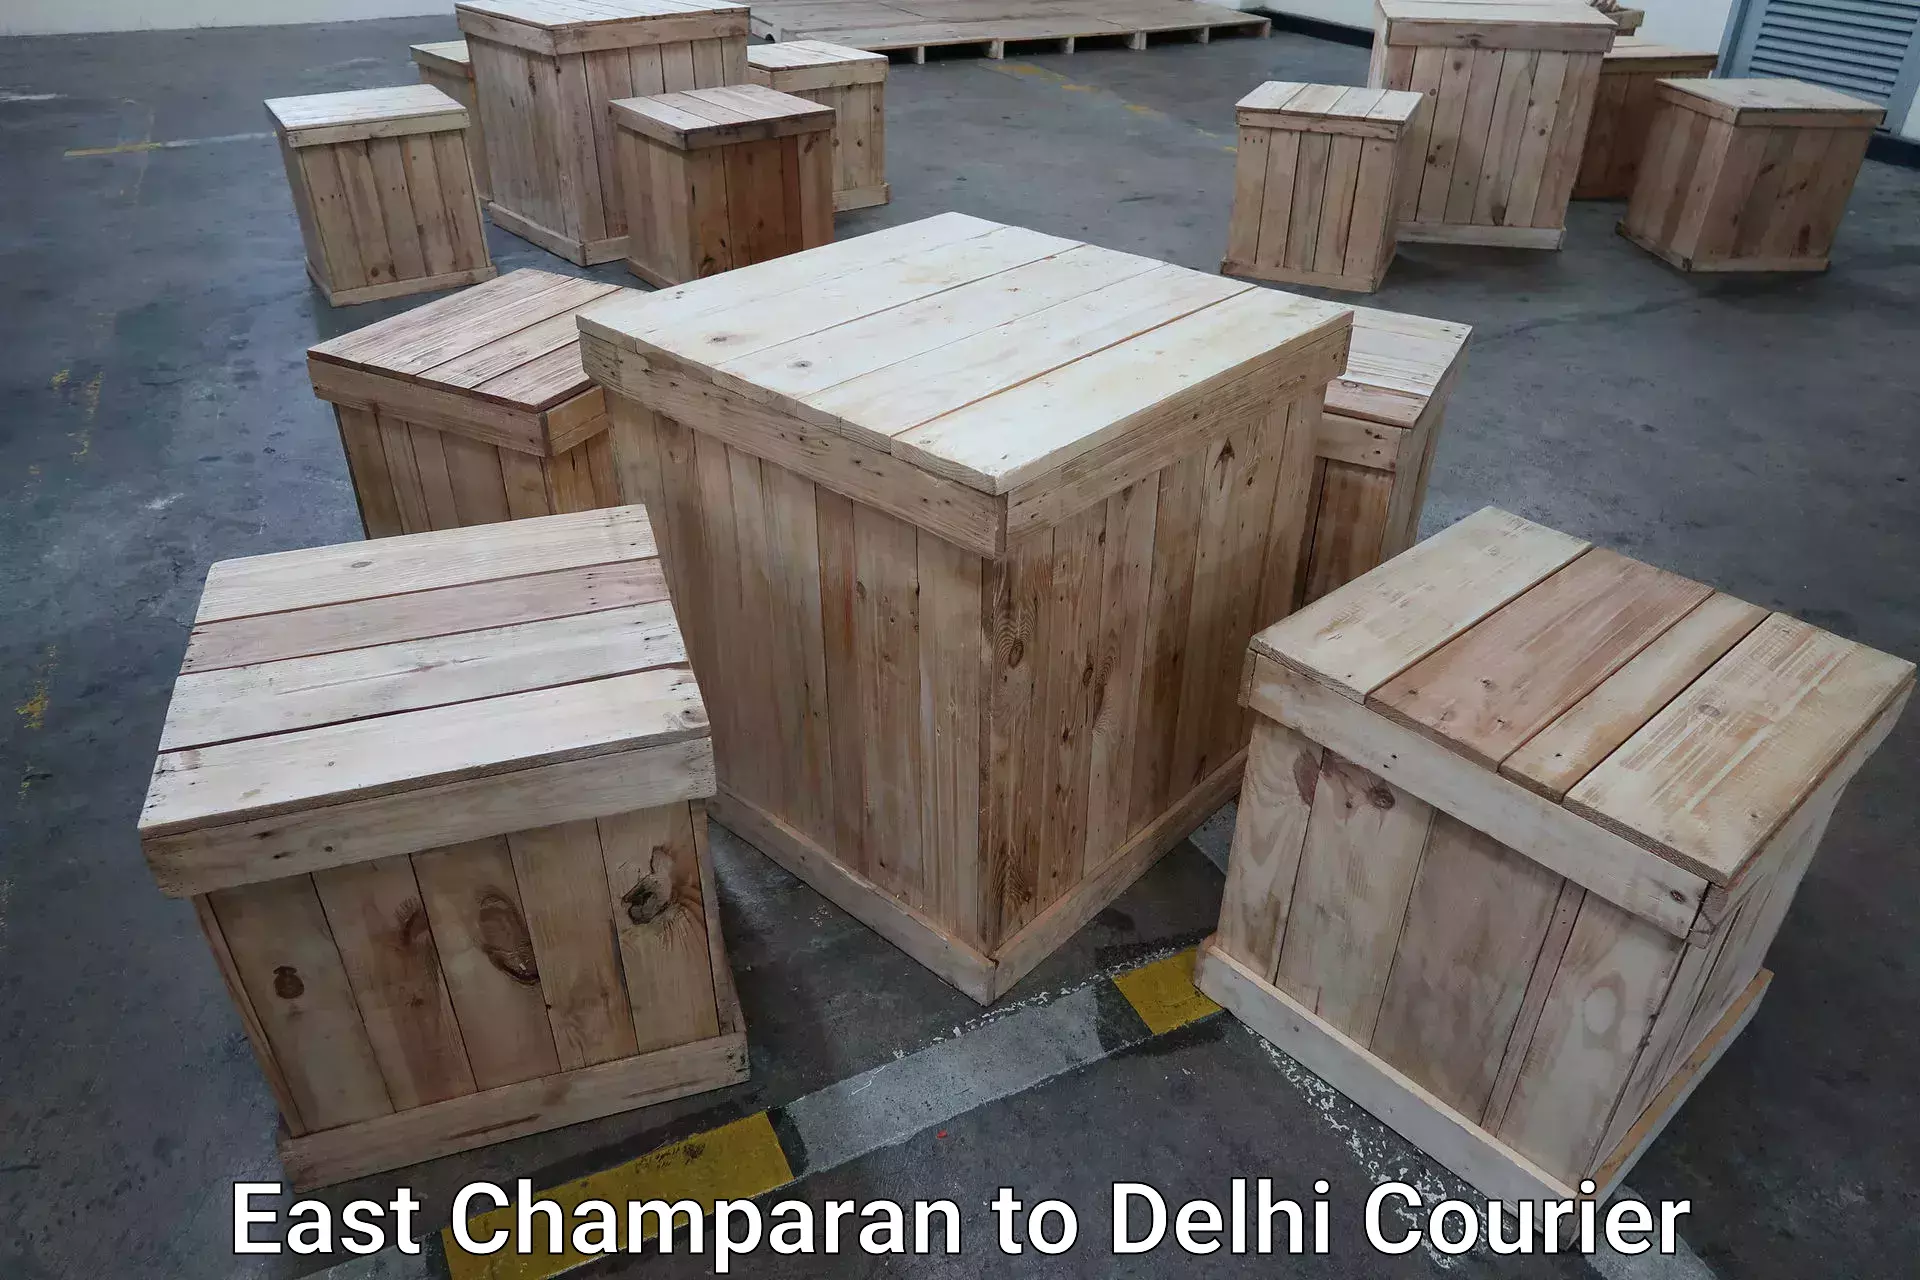 Luggage transport consulting East Champaran to Delhi